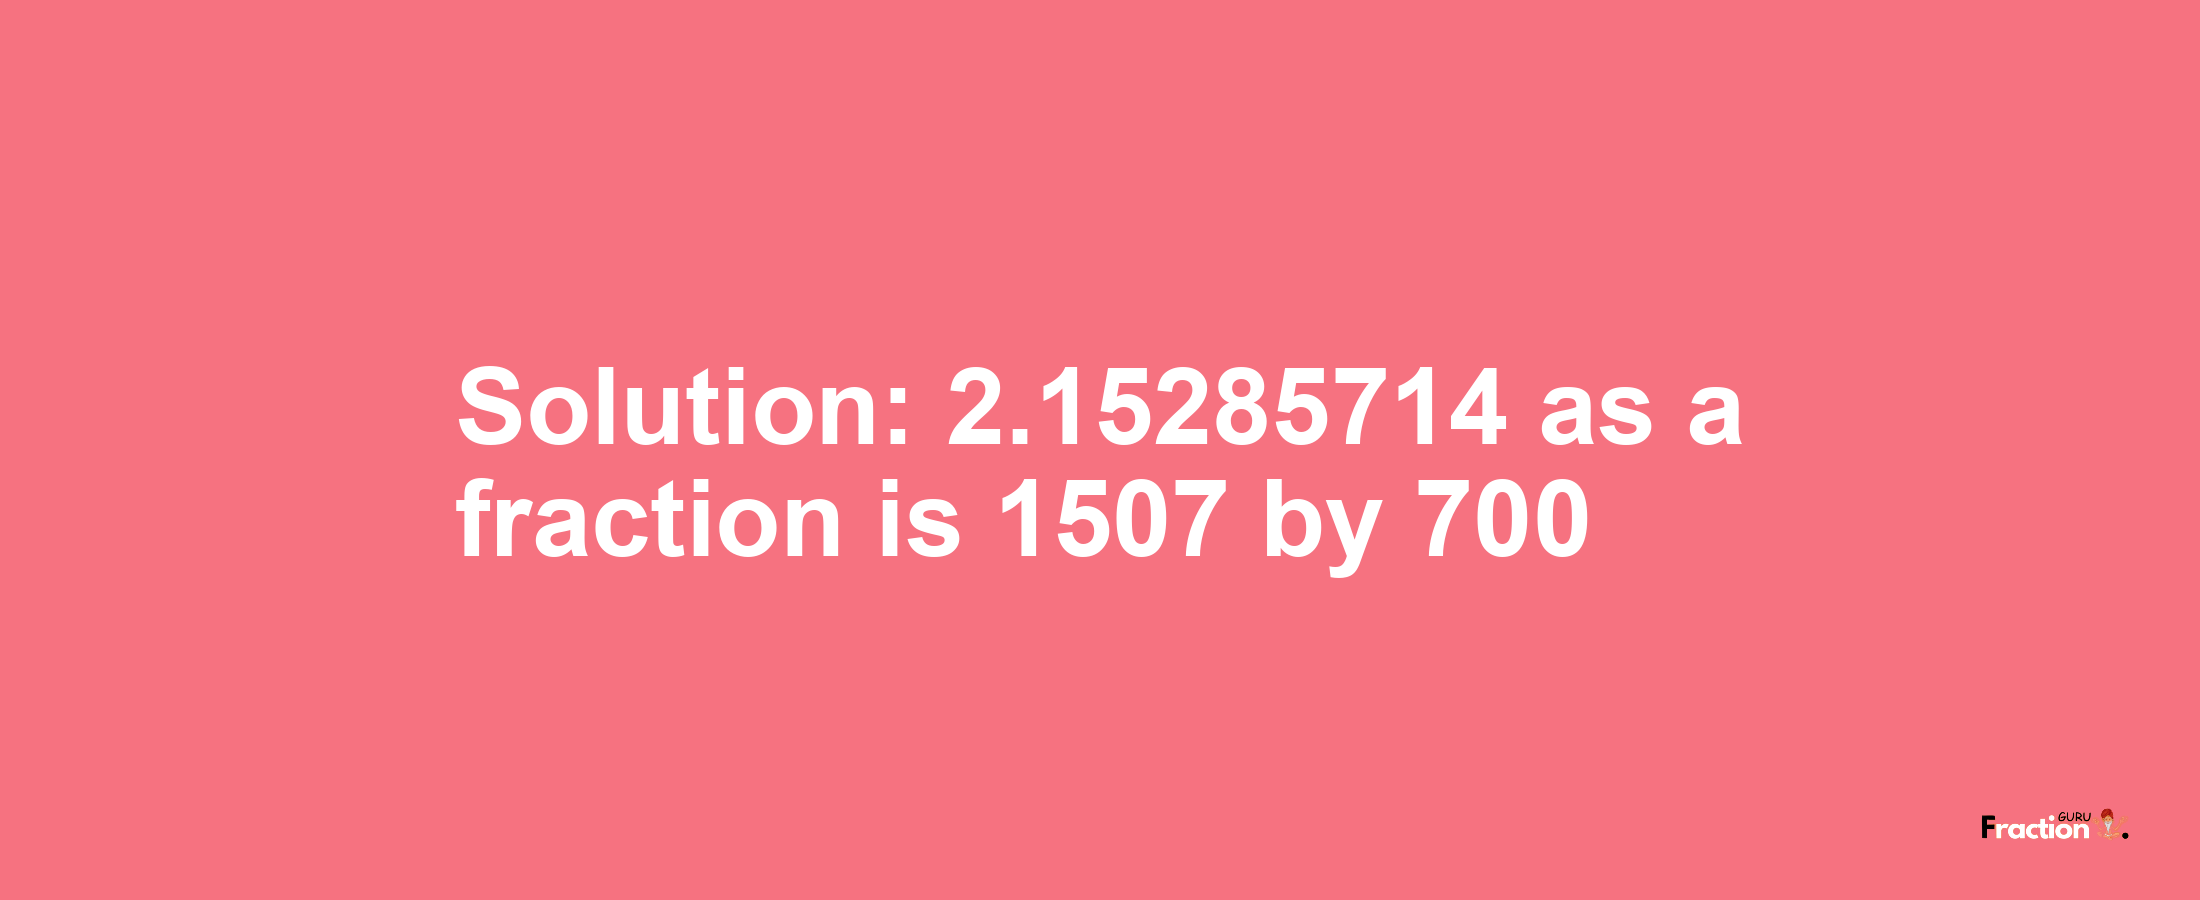 Solution:2.15285714 as a fraction is 1507/700